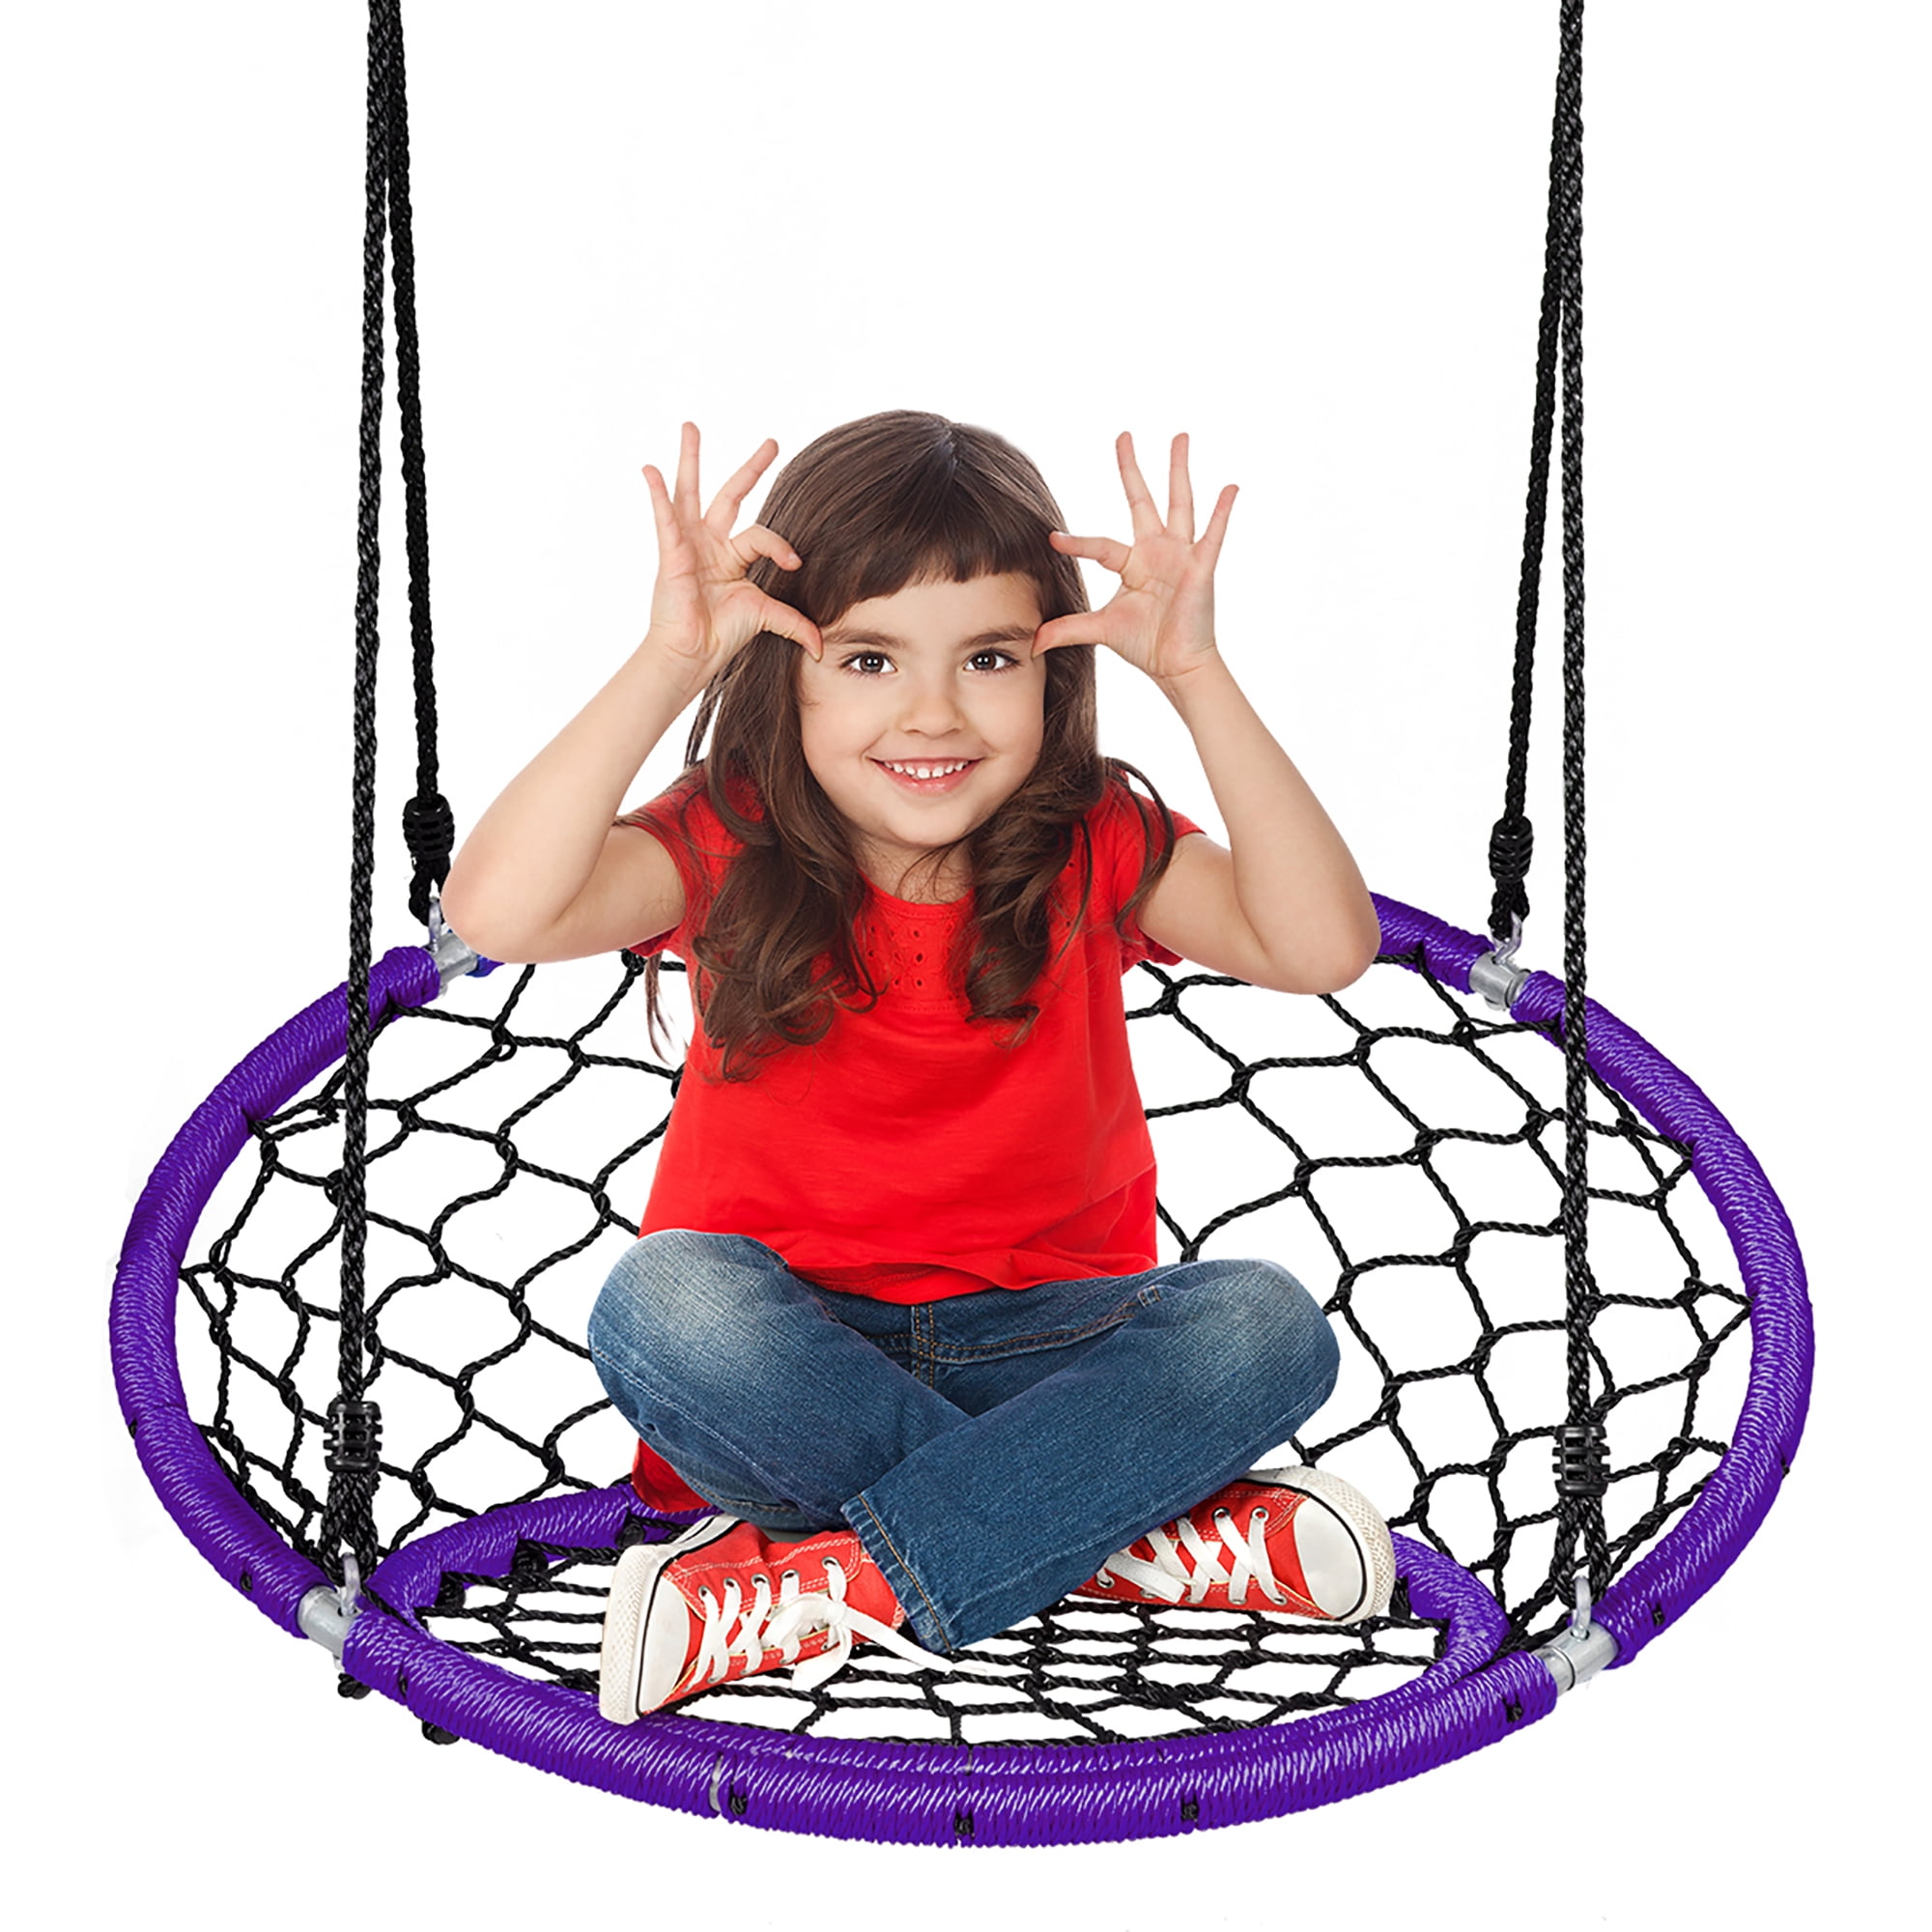 Details about   Ball Indoor Swing Seat with Nylon Rope for Child Backyard Play Set Purple 